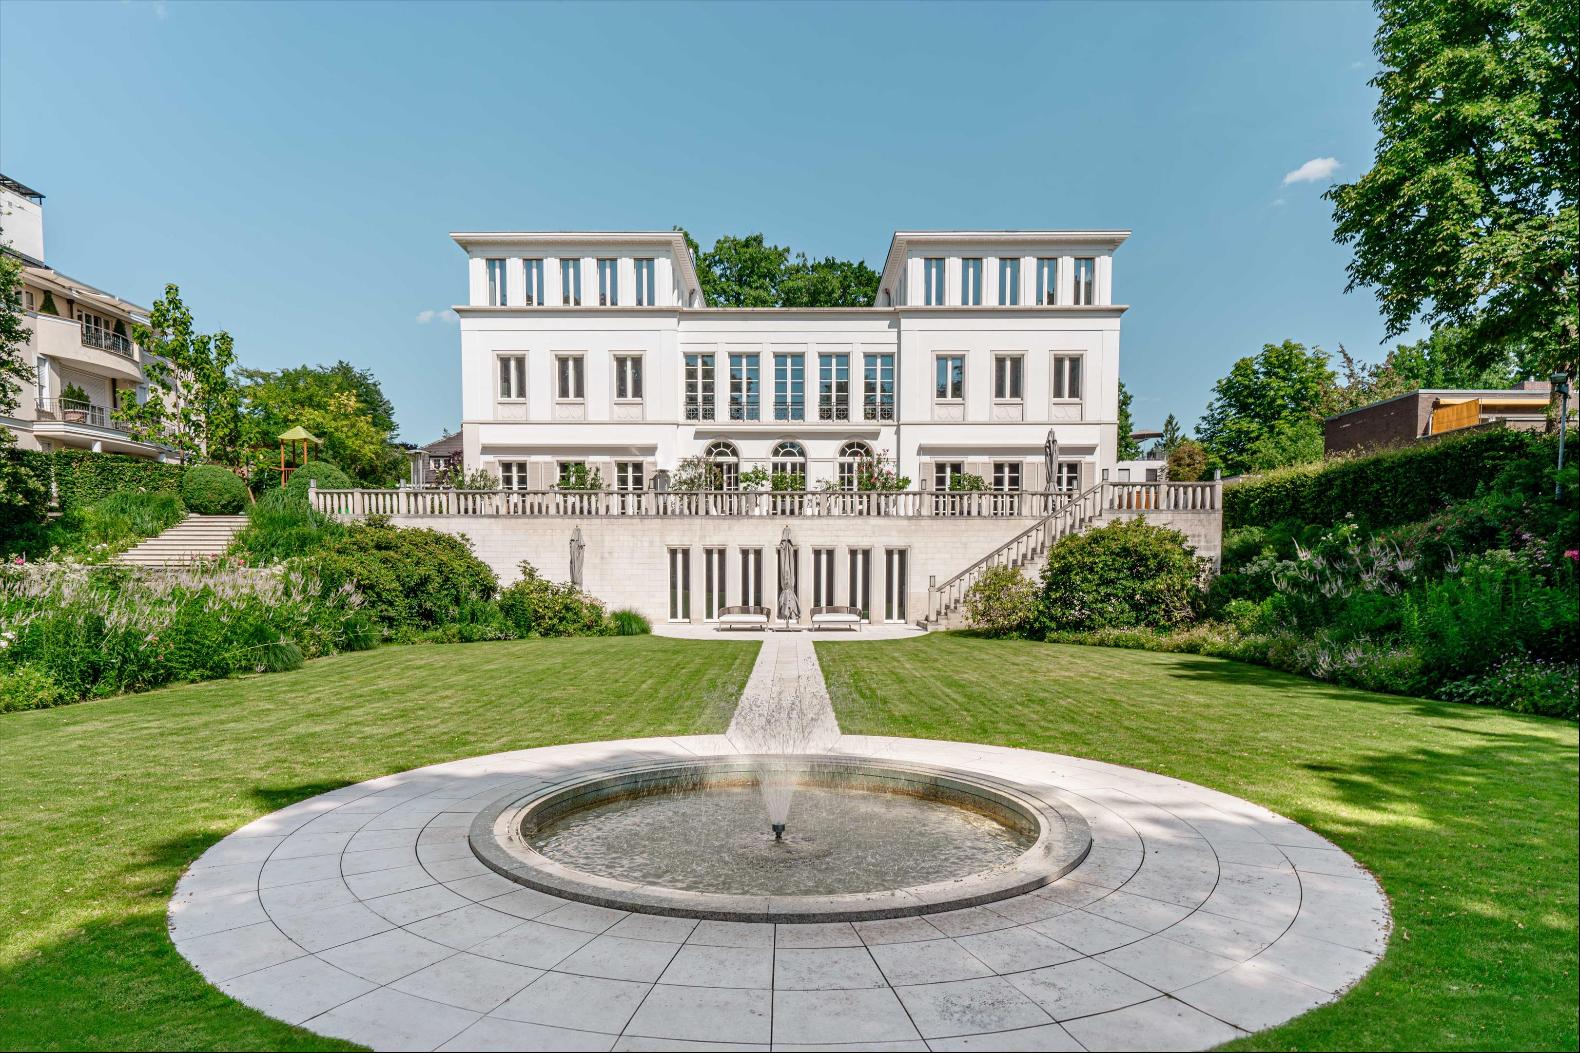 Magnificent, manorial villa with breathtaking luxury in a prime location Berlin-Dahlem.